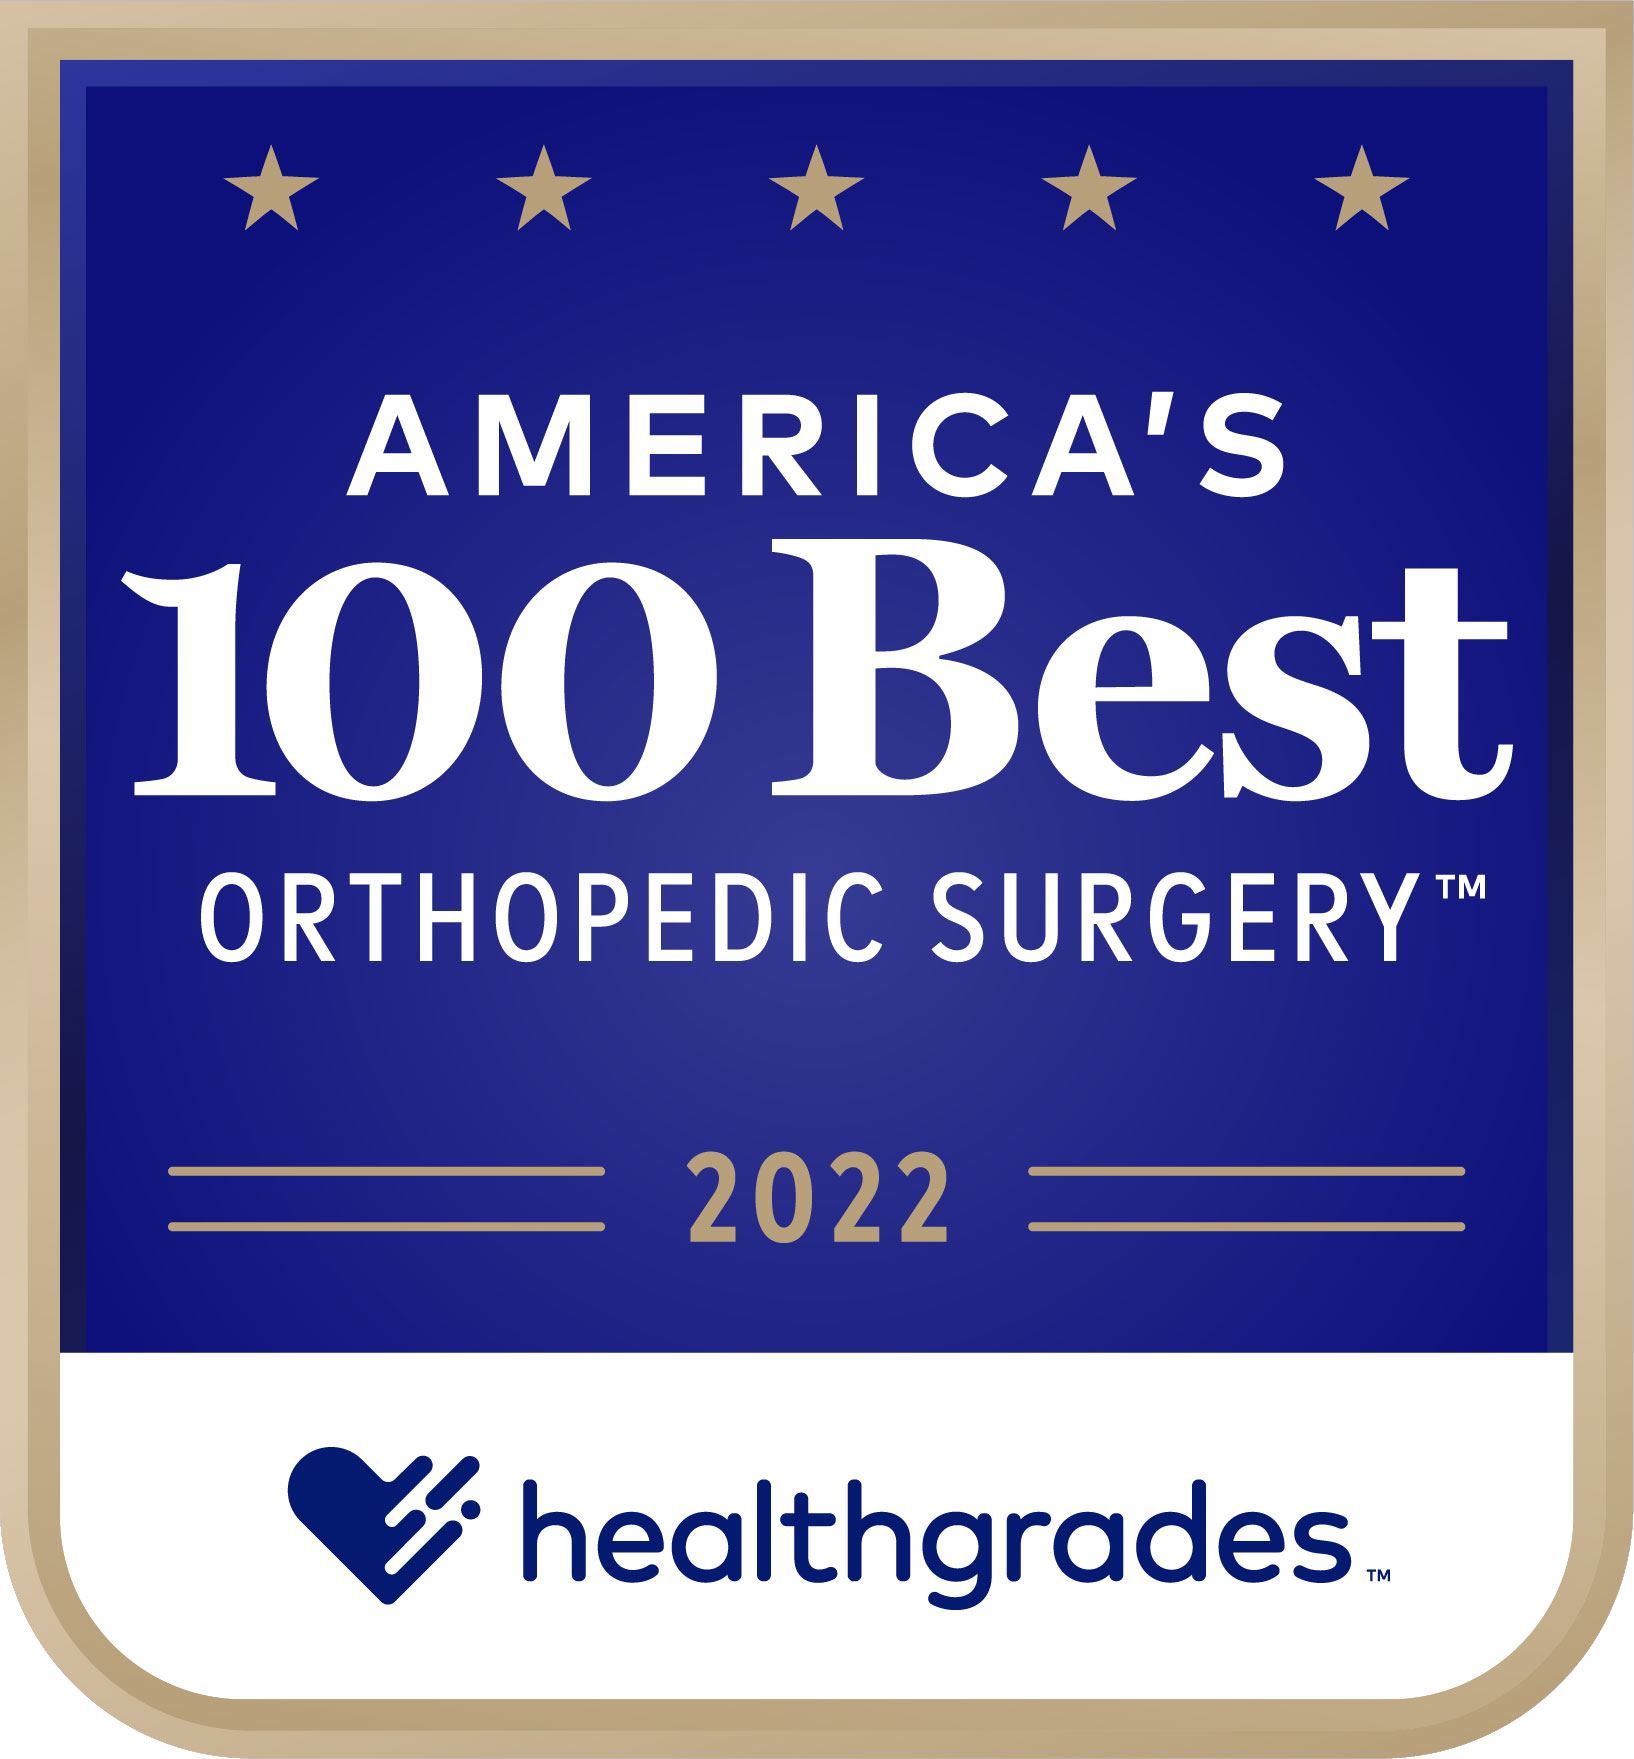 Healthgrades 100 Best Hospitals for Orthopedic Surgery 2022